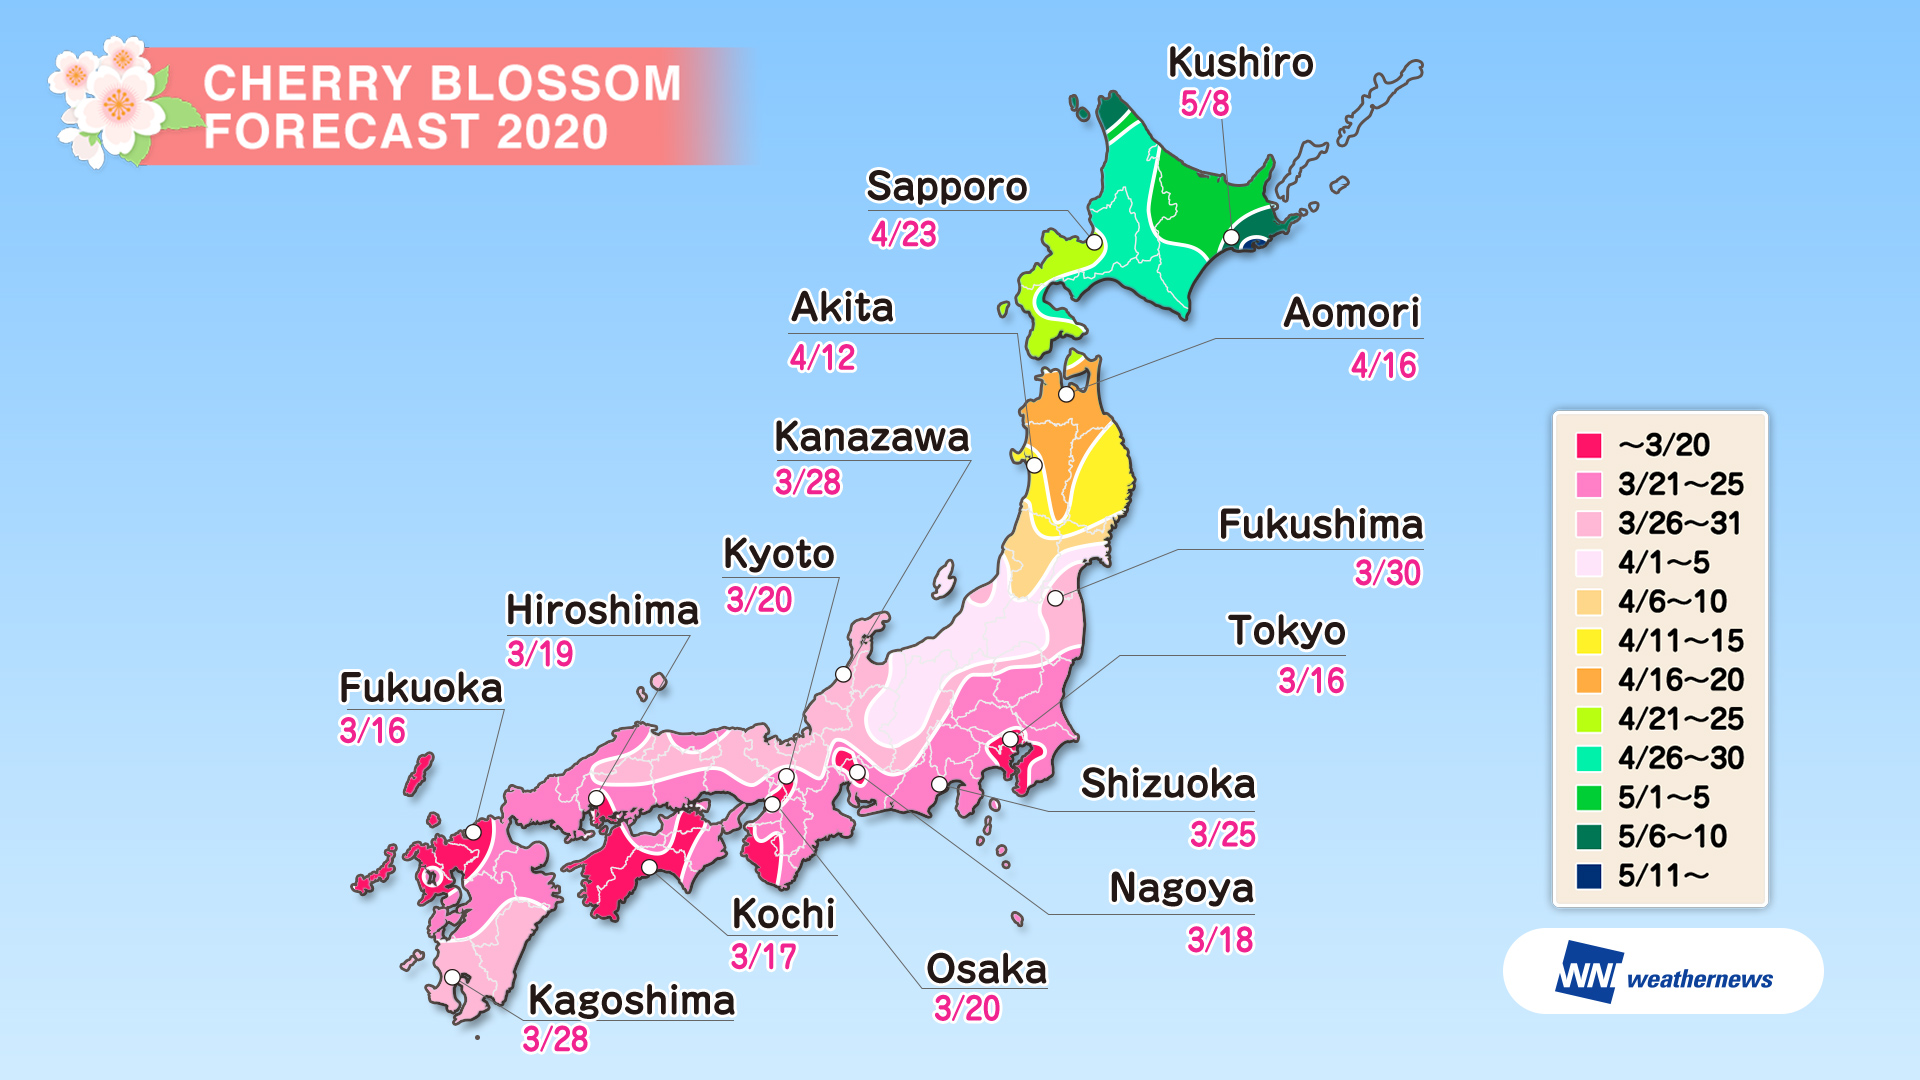 cherry-blossom-forecast-2020-in-japan-weathernews-inc